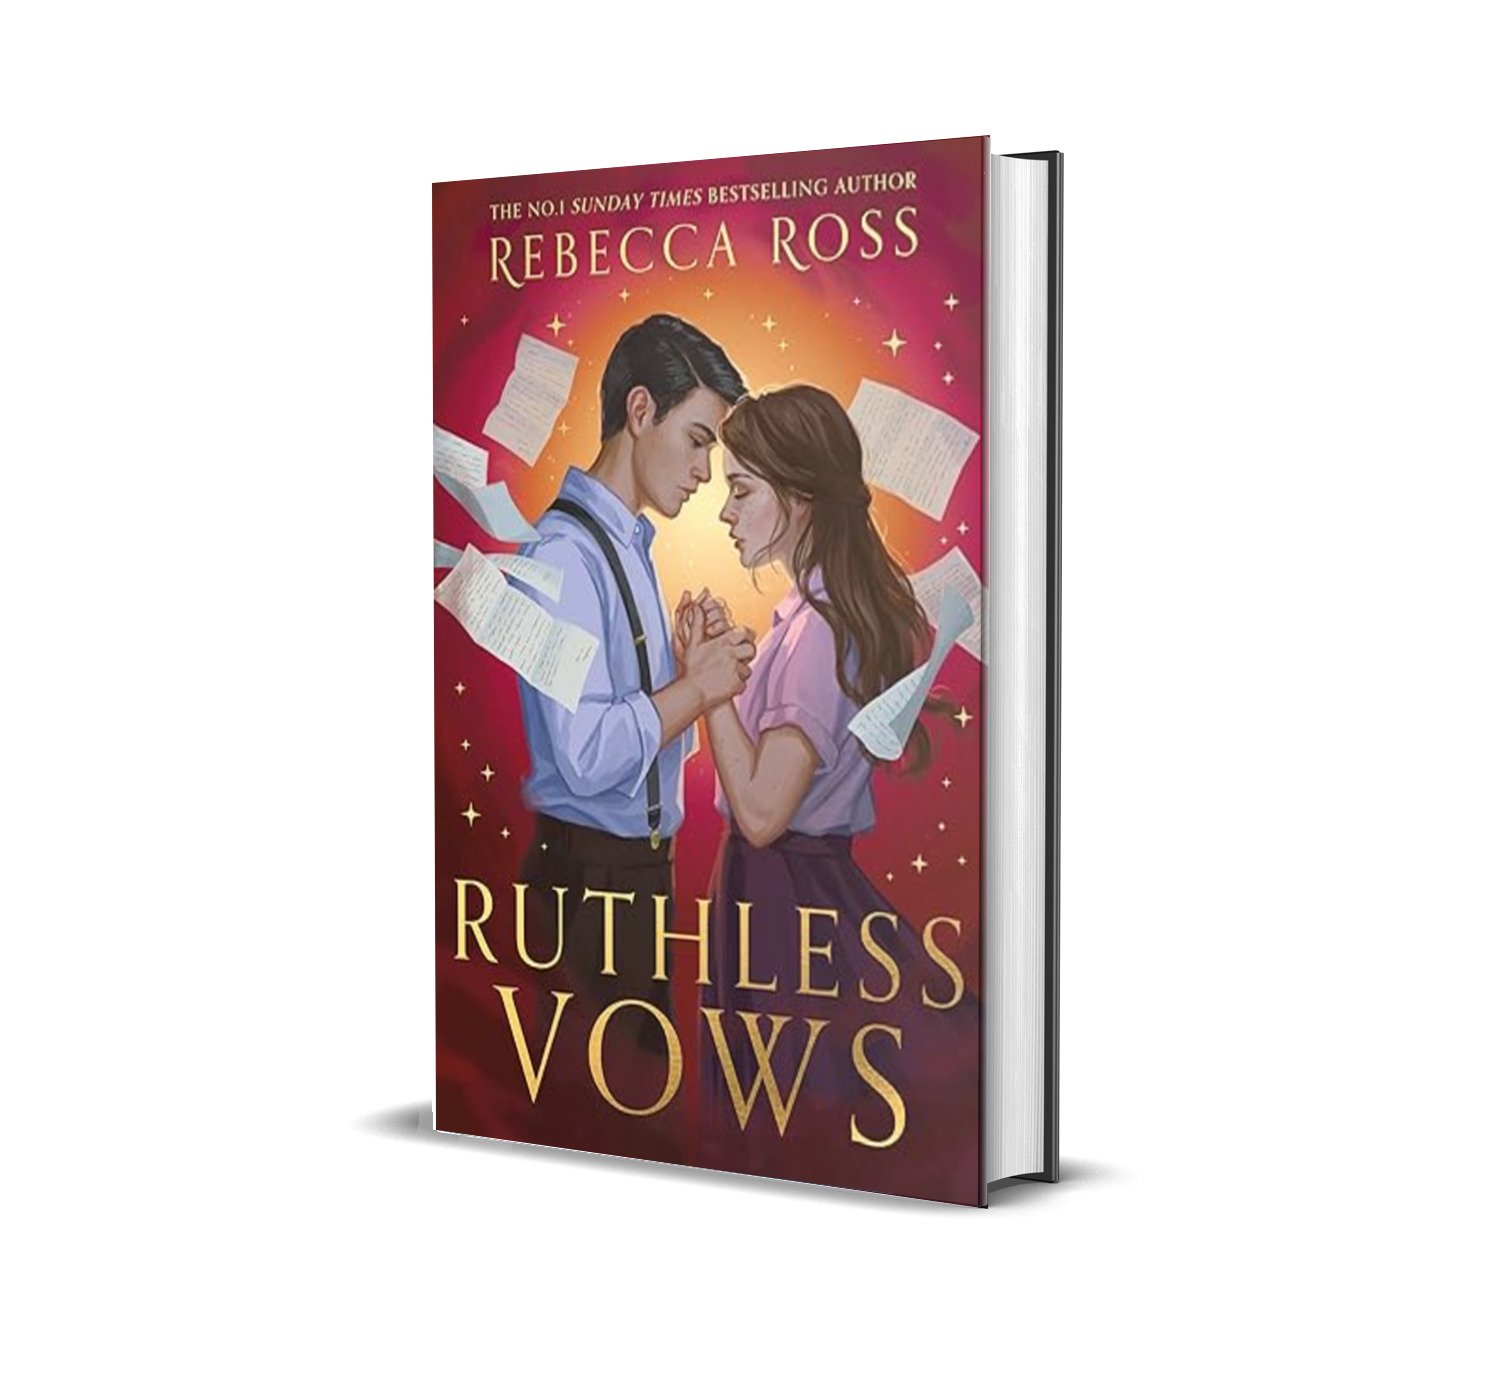 [UK Cover] Ruthless Vows by Rebecca Ross